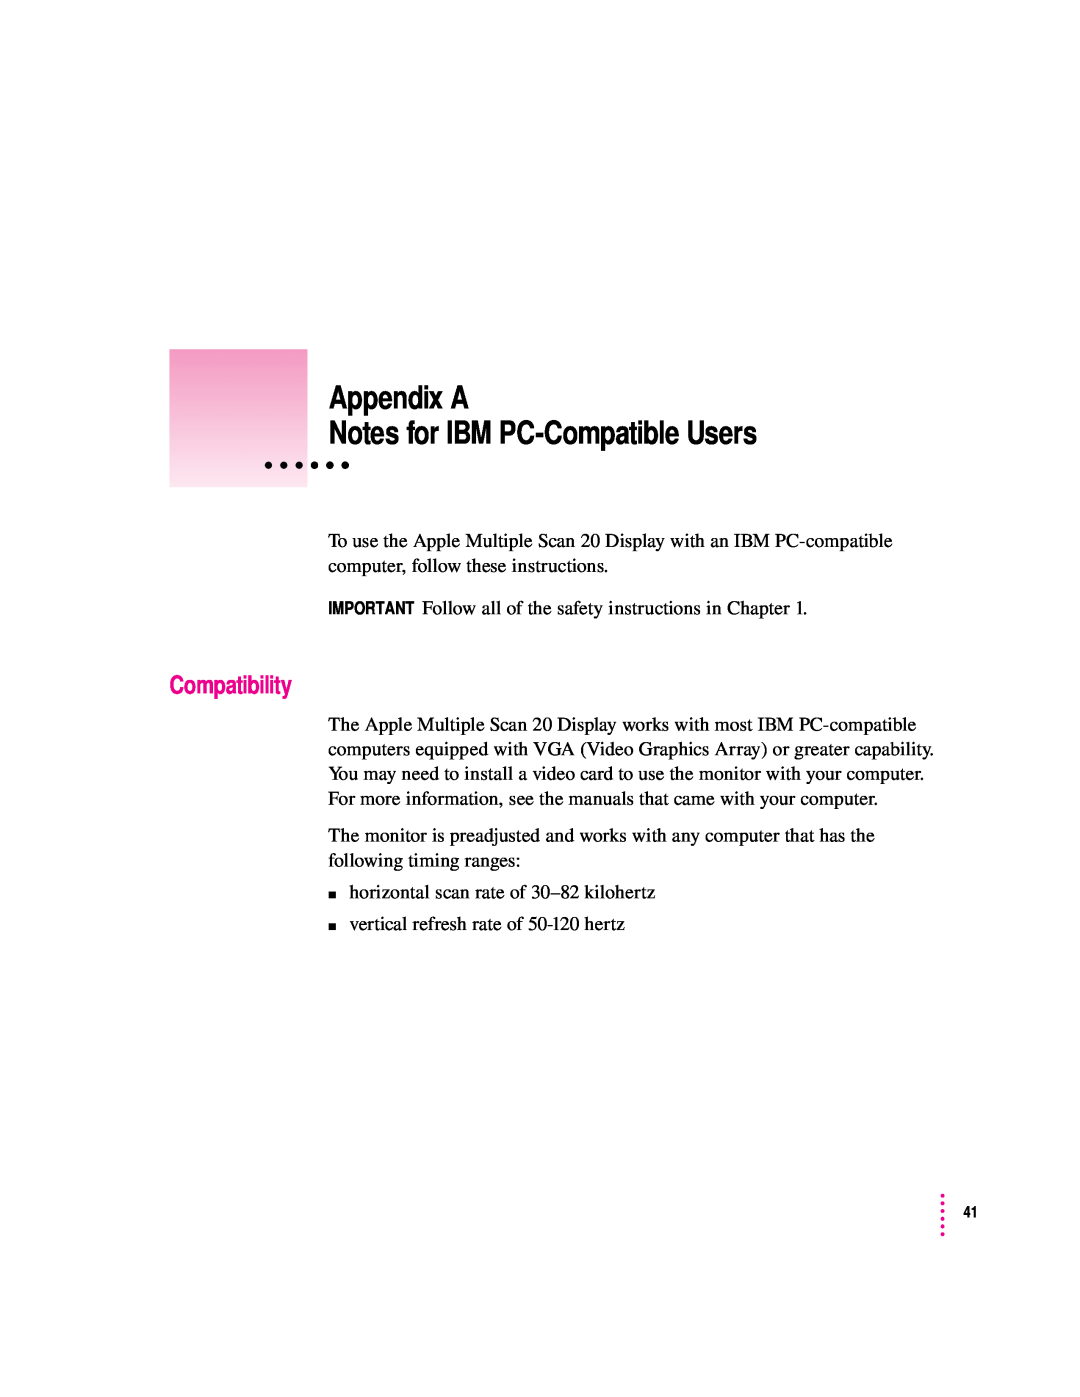 Apple 20Display manual Appendix A Notes for IBM PC-Compatible Users, Compatibility 